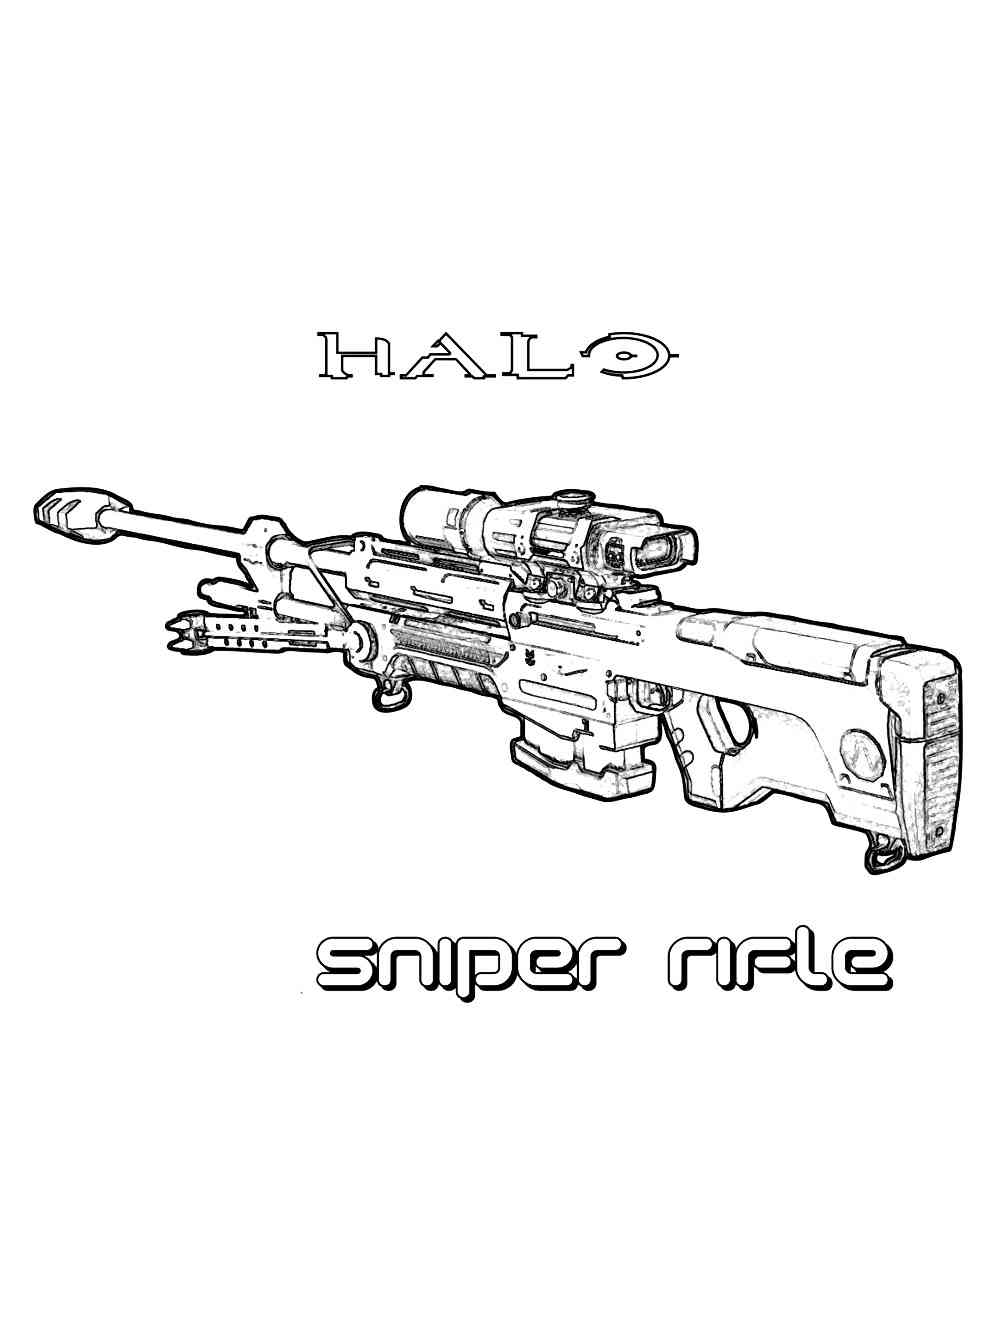 Halo Sniper Rifle coloring page